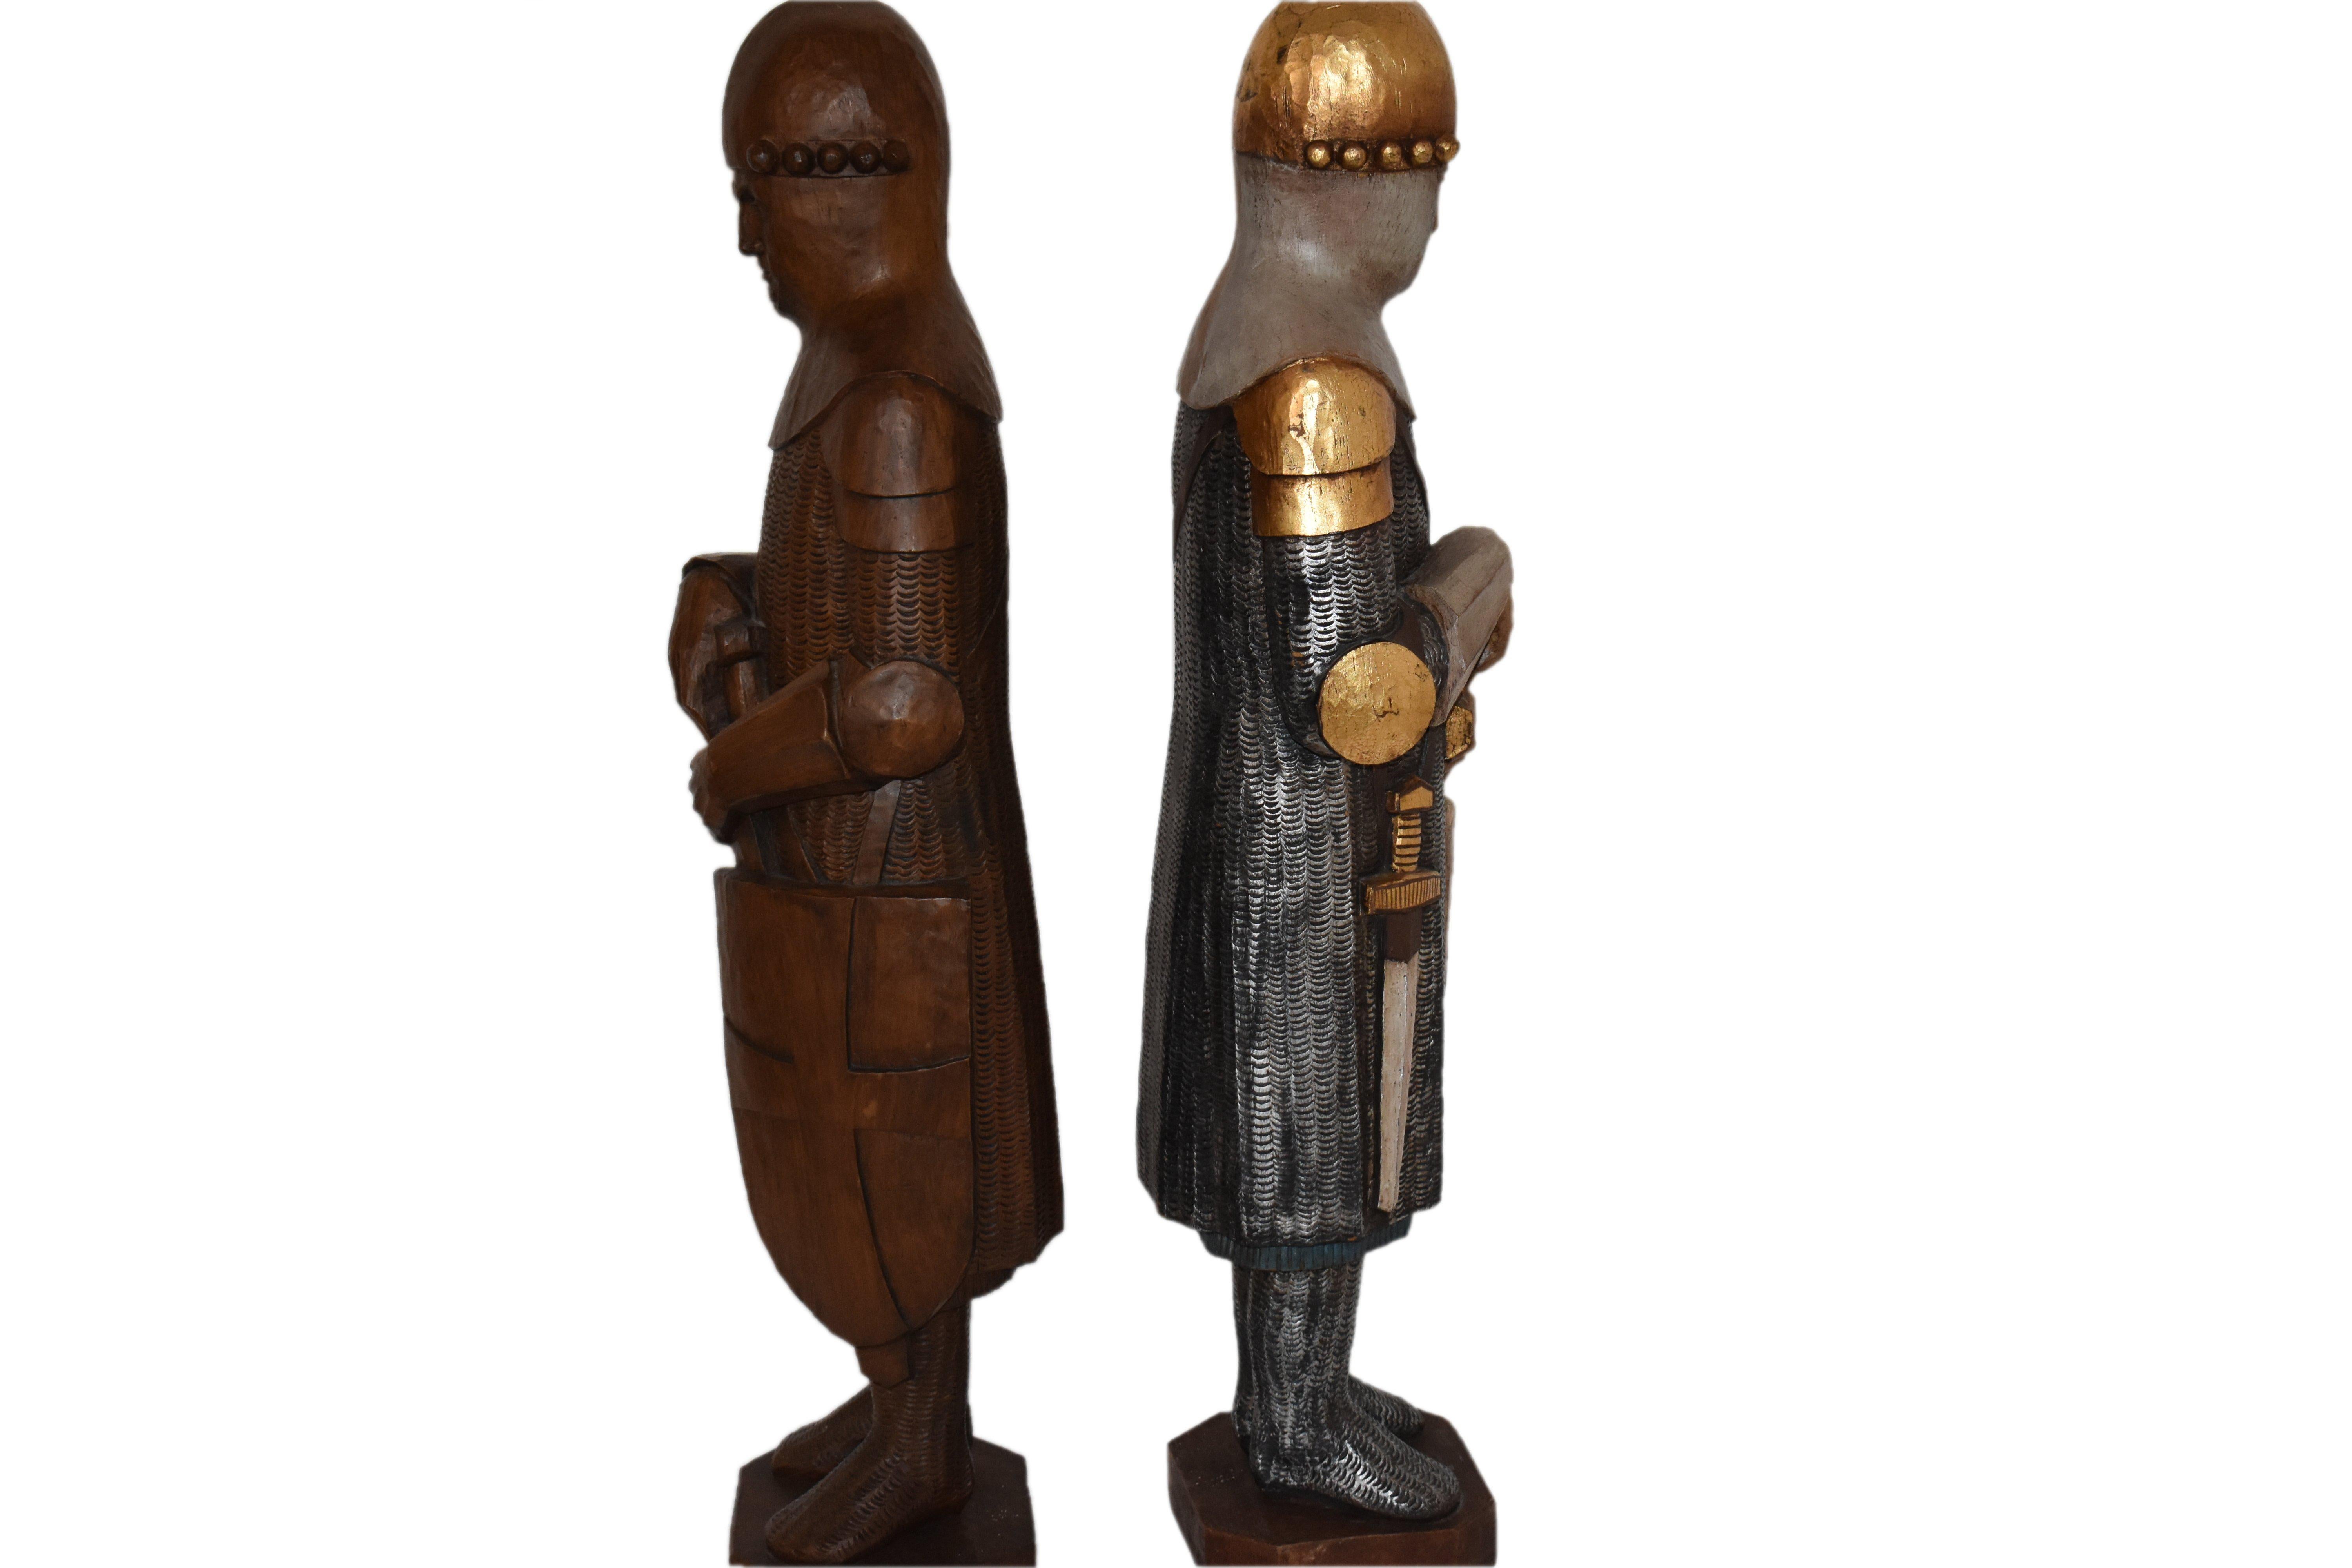 FINAL SALE Large Medieval Crusader Knight Sculptures, Carved Wood and Polychrome For Sale 4